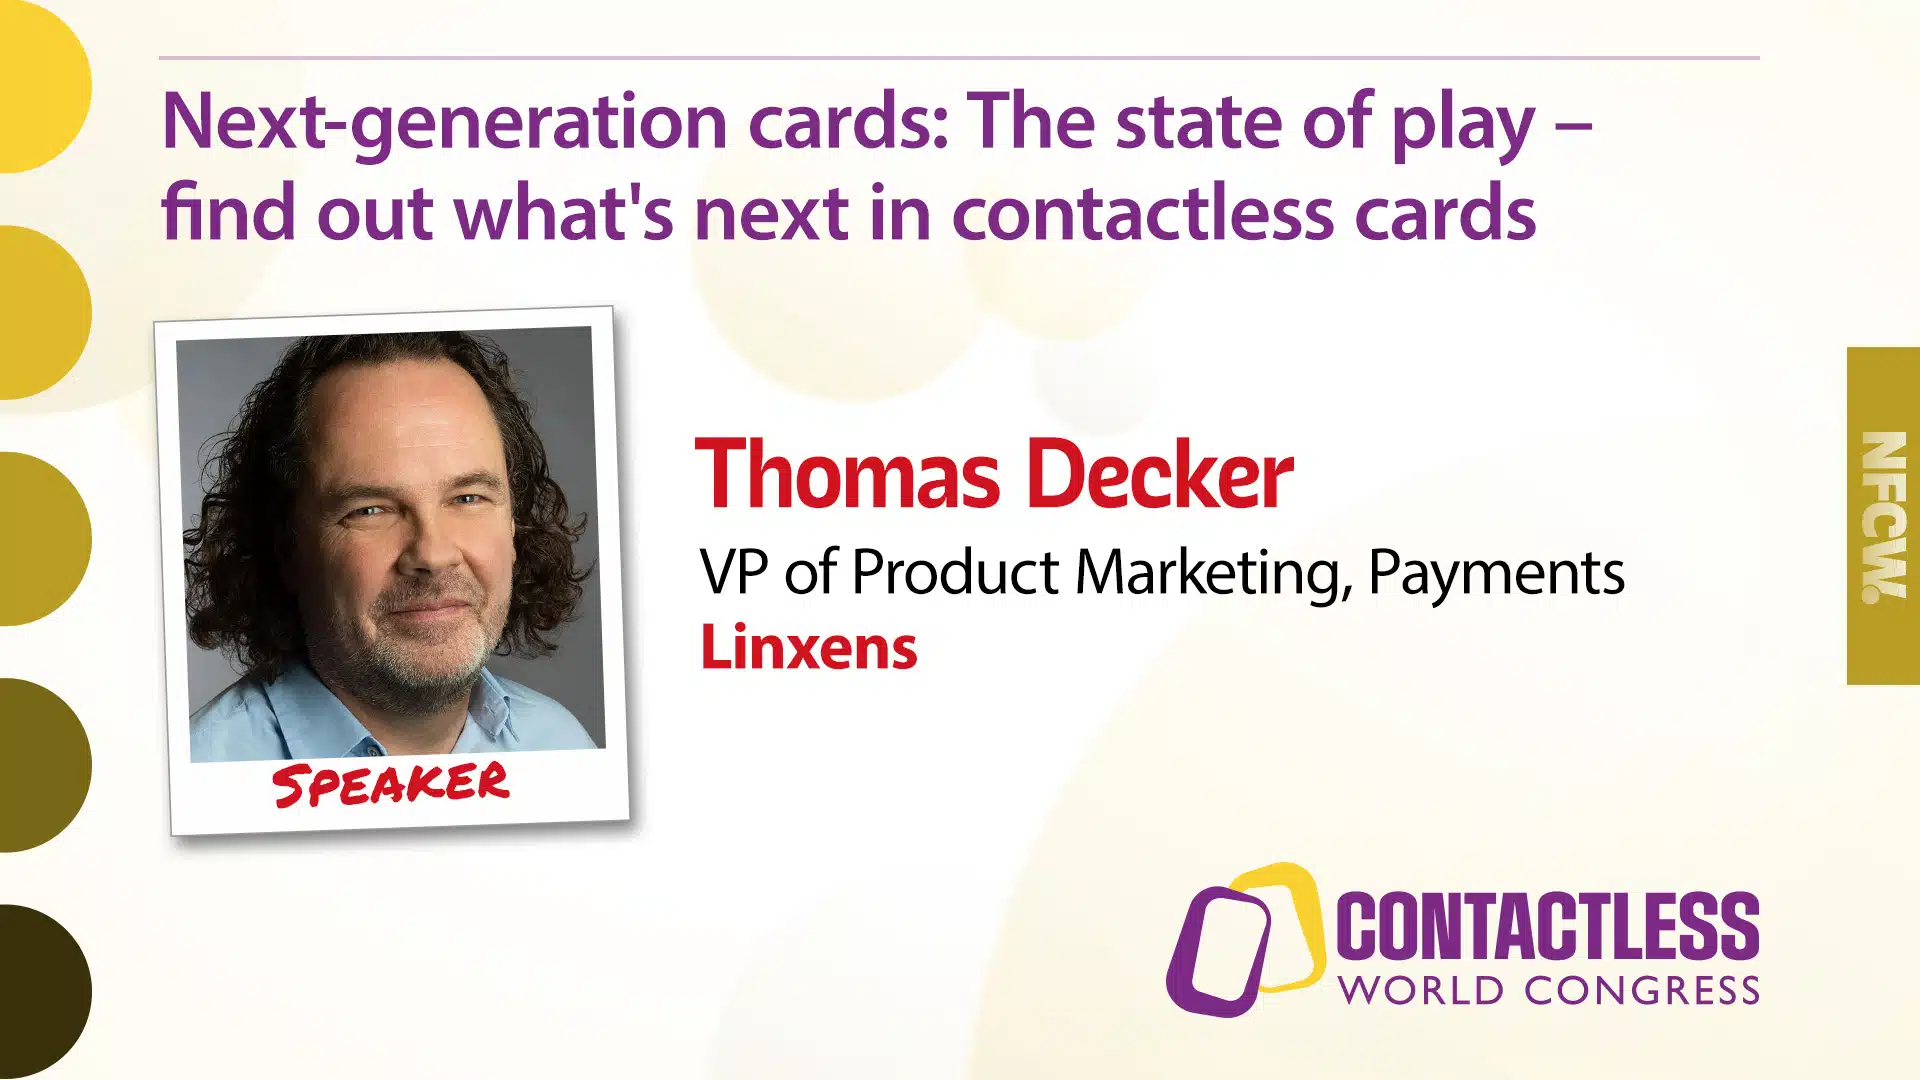 Find out what's next in contactless cards as Linxens' Thomas Decker presents on 'Next-generation cards: The state of play'